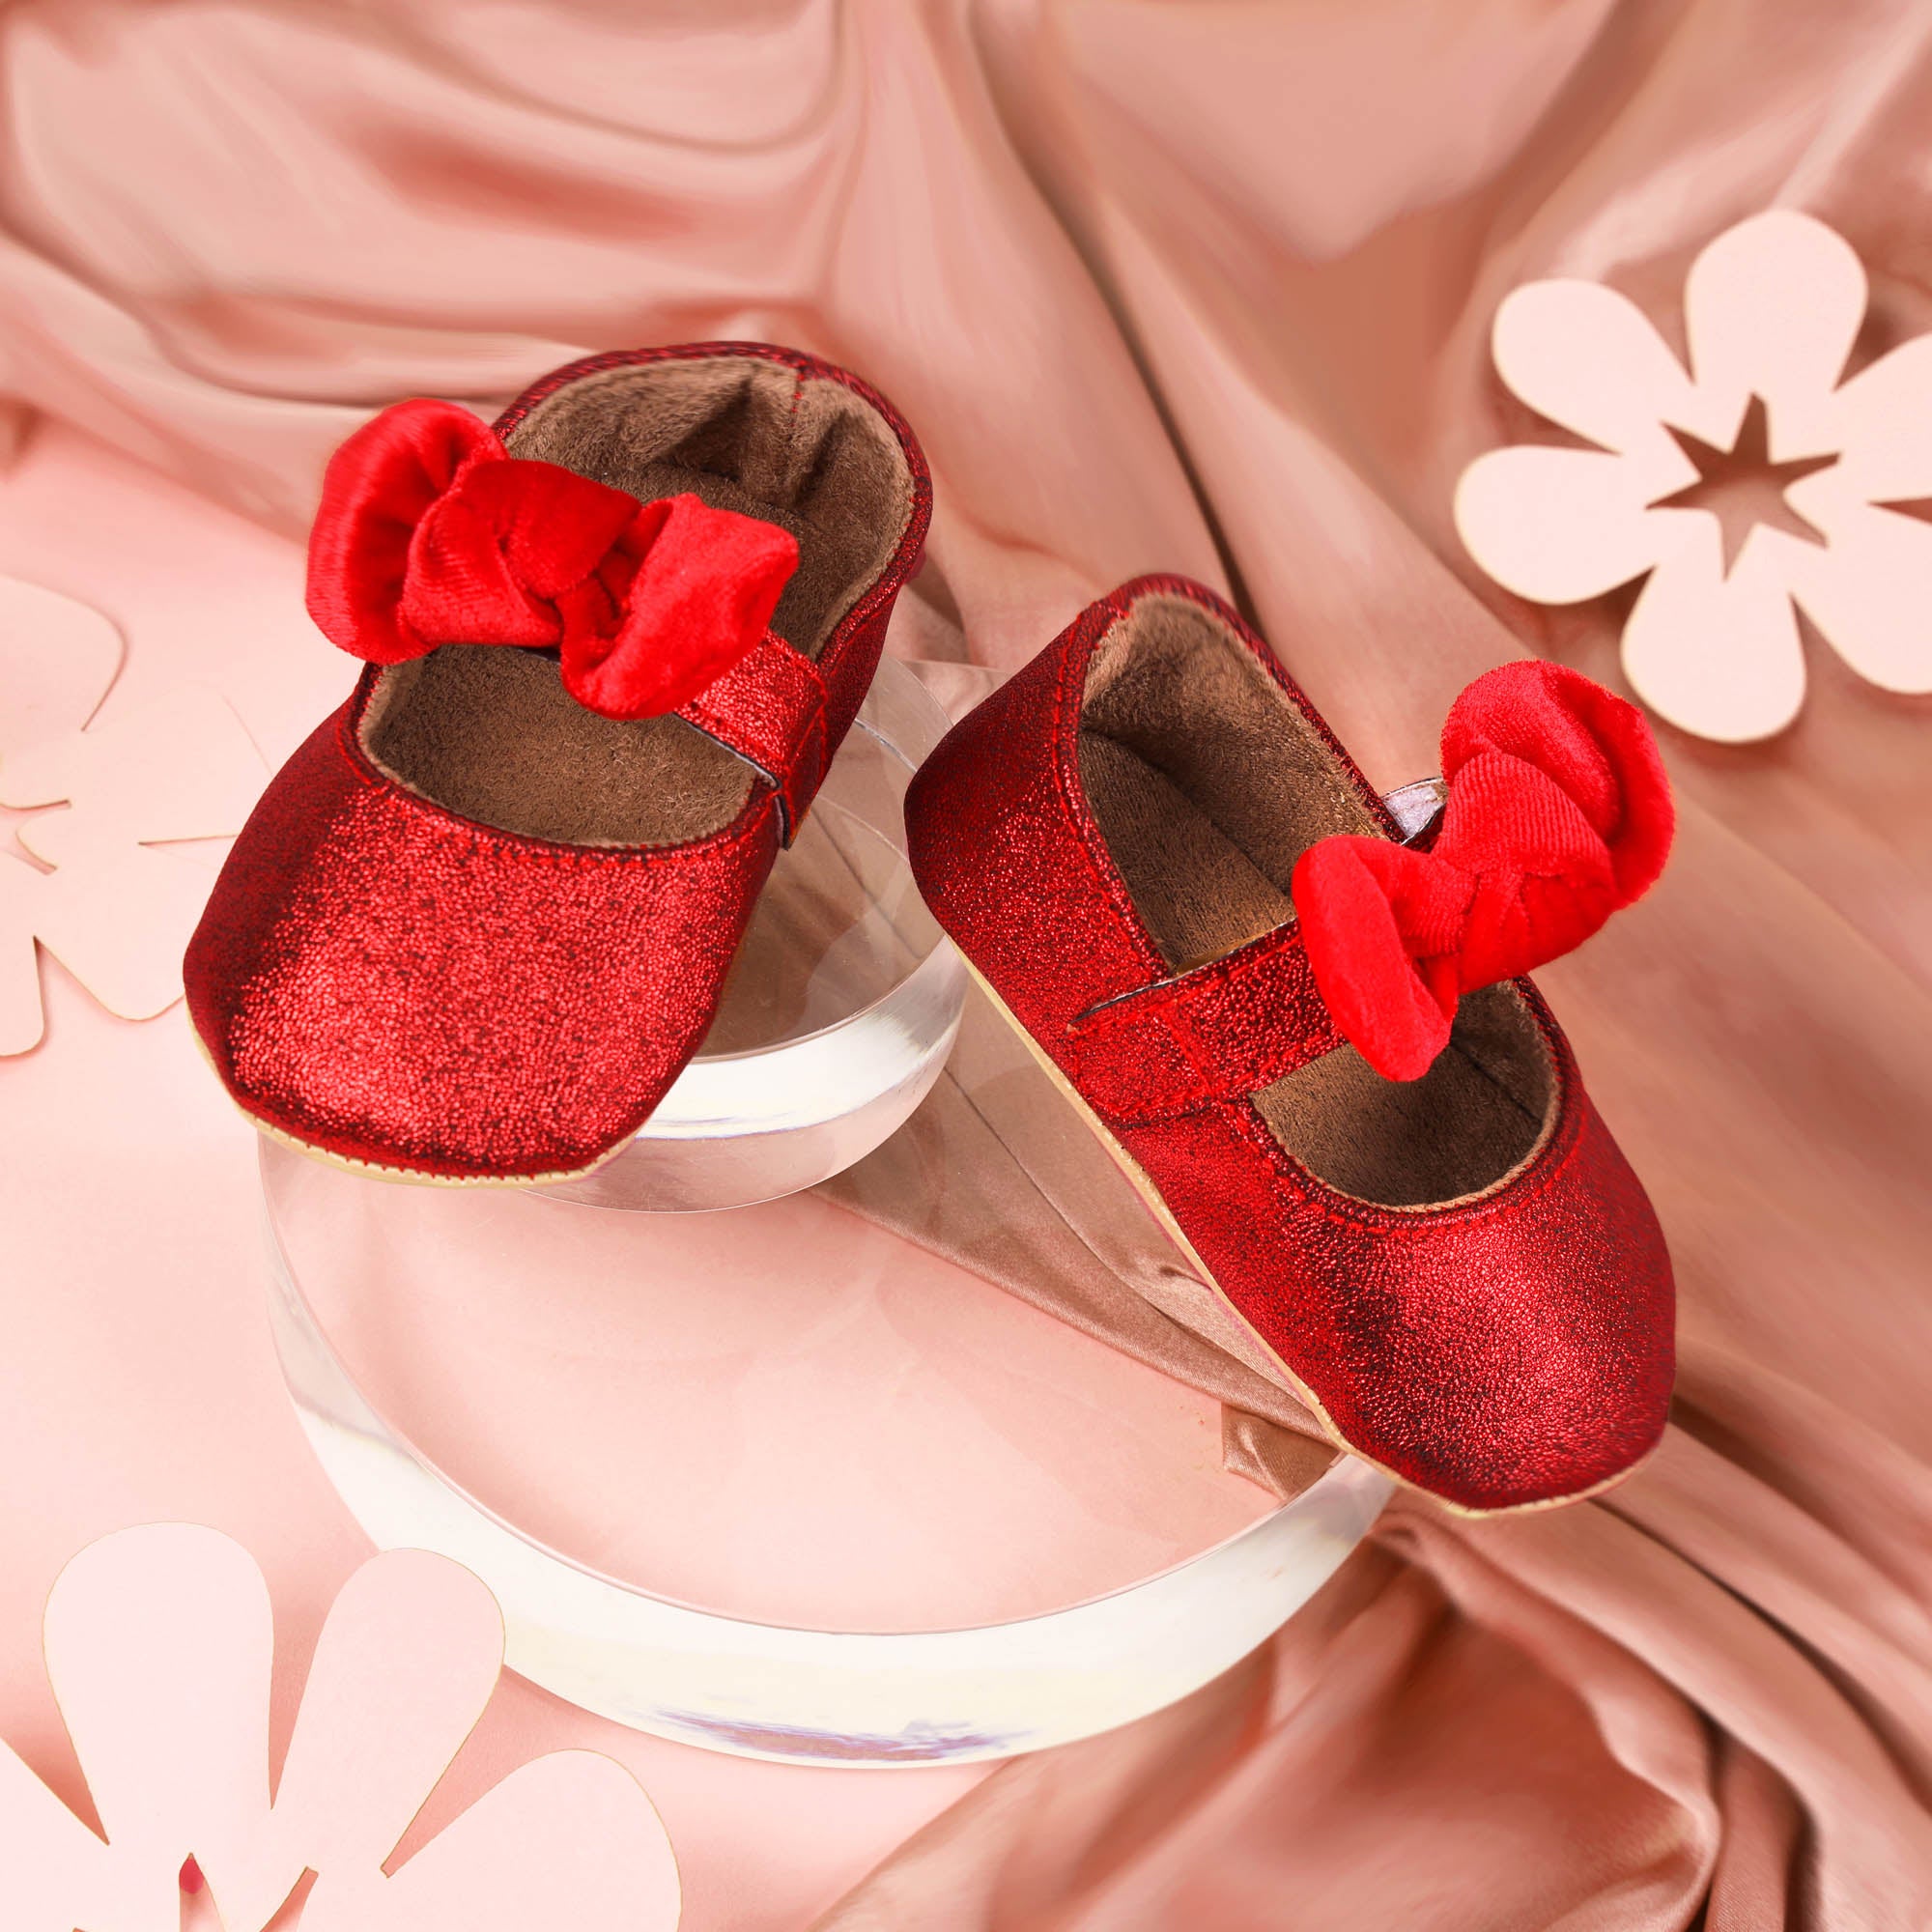 Kicks & Crawl- Cherry Red Party Shoes